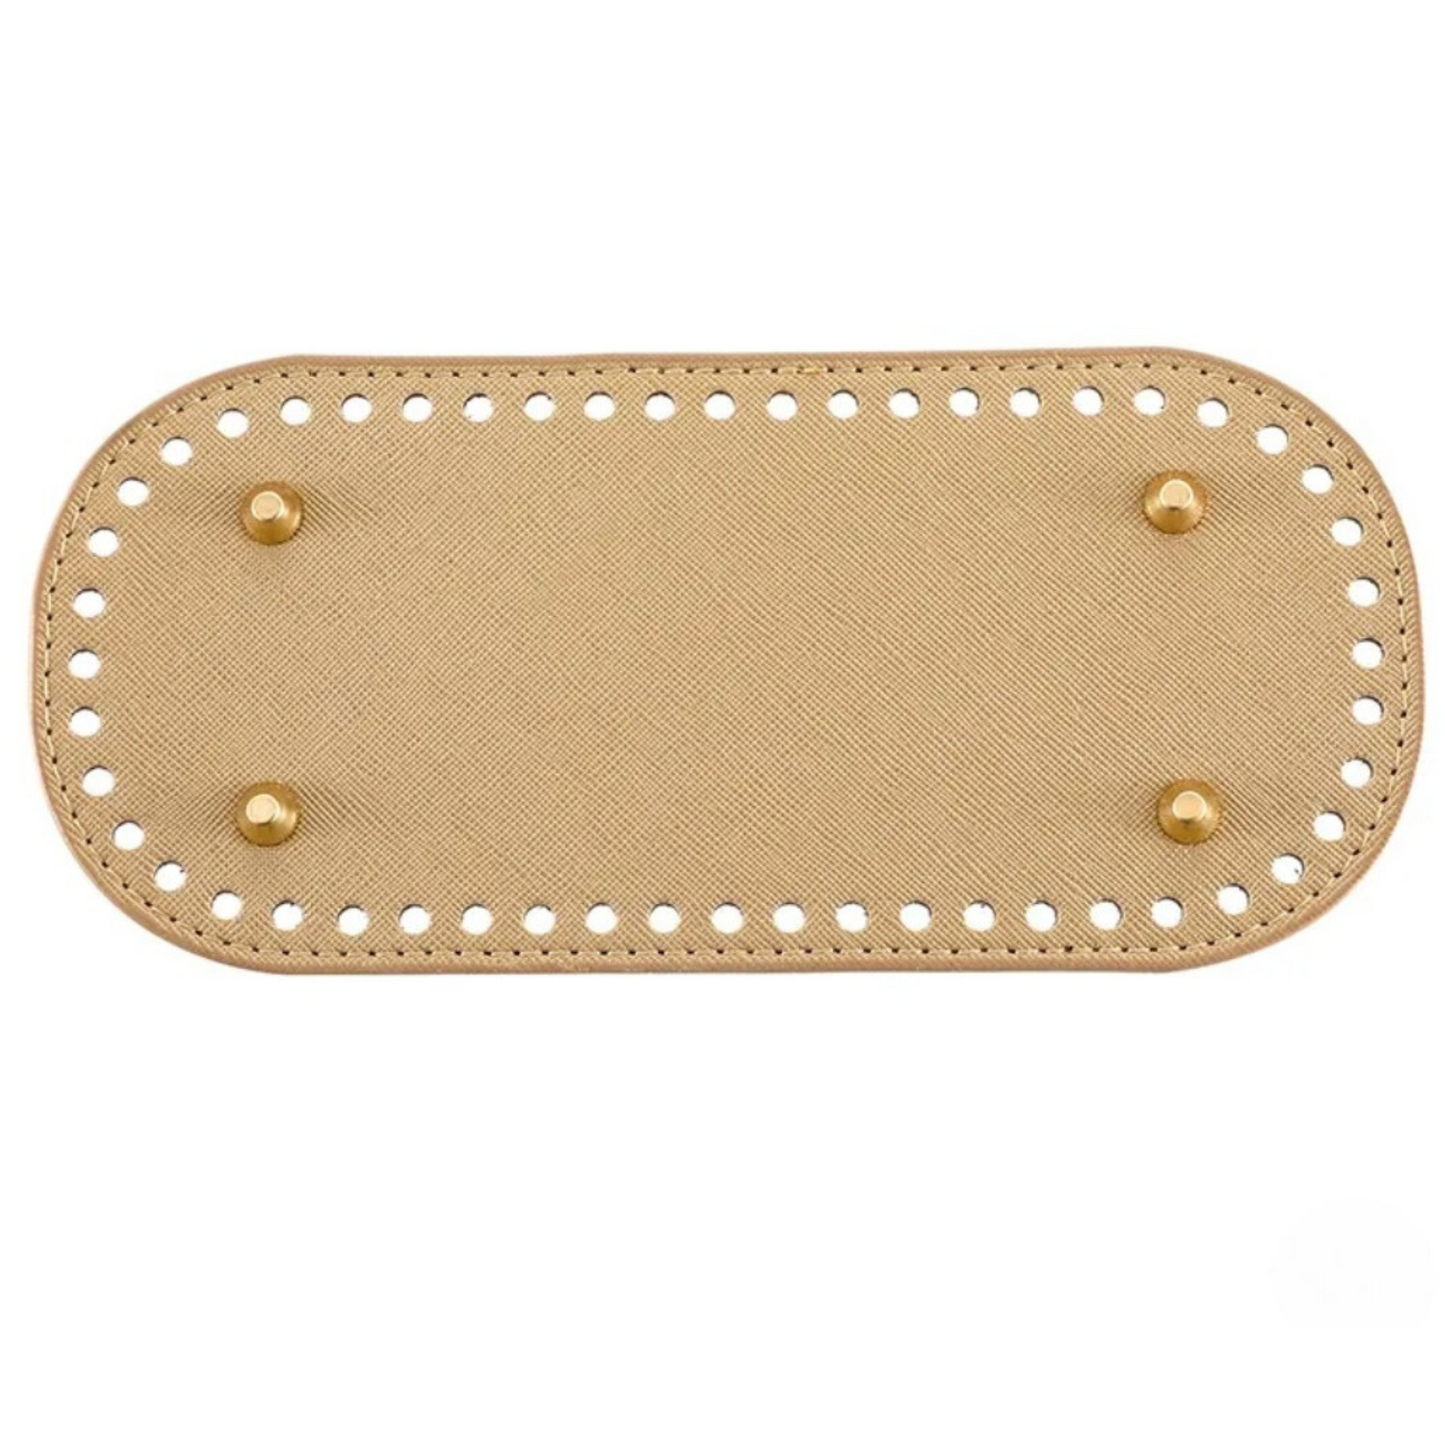 Leather Base with holes for Crochet Bag Making